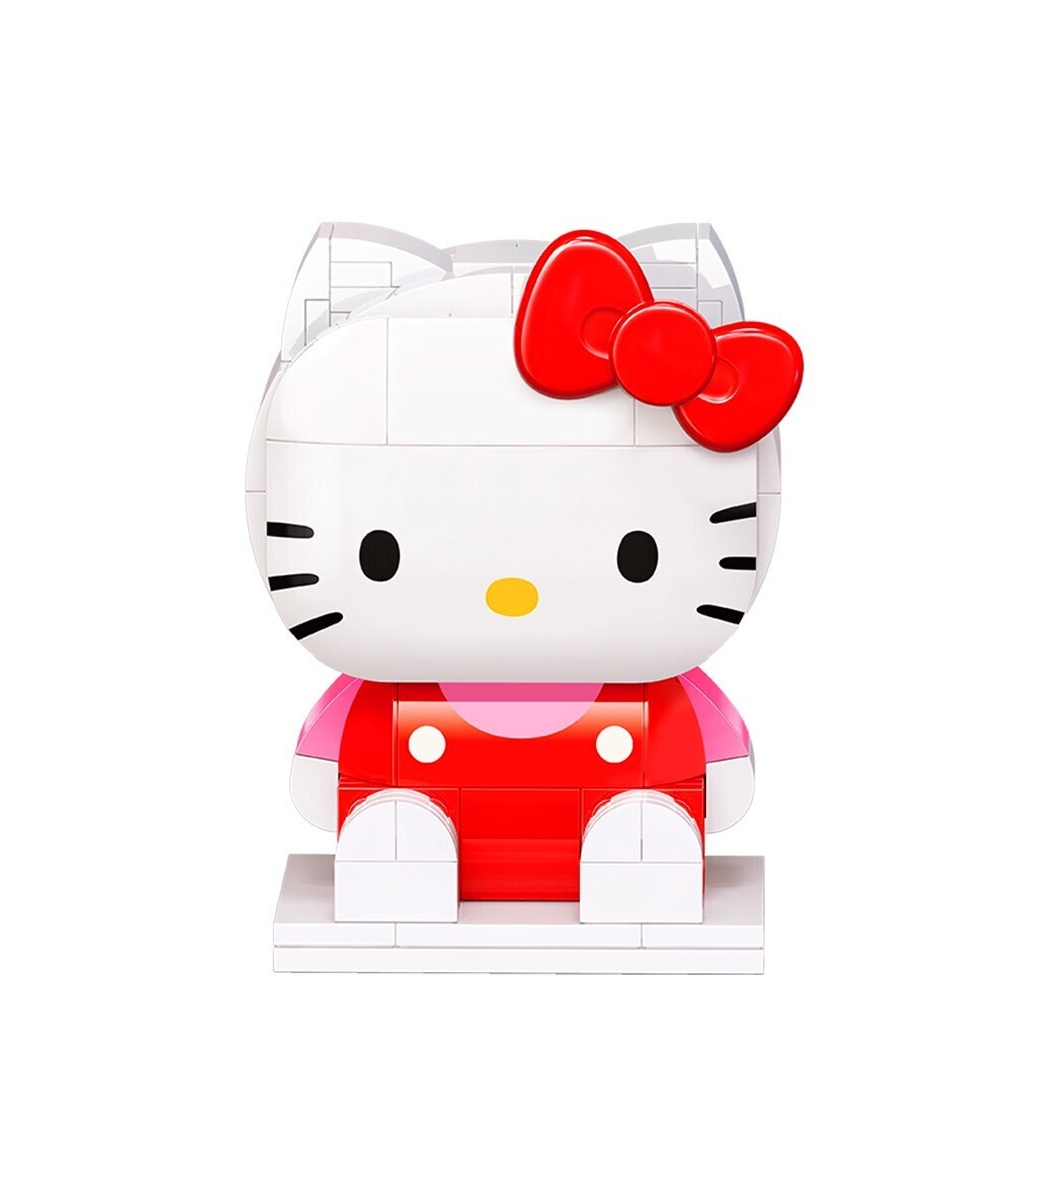 Hello Kitty • Pink • Lego Block Character – Ruffles in the Mud